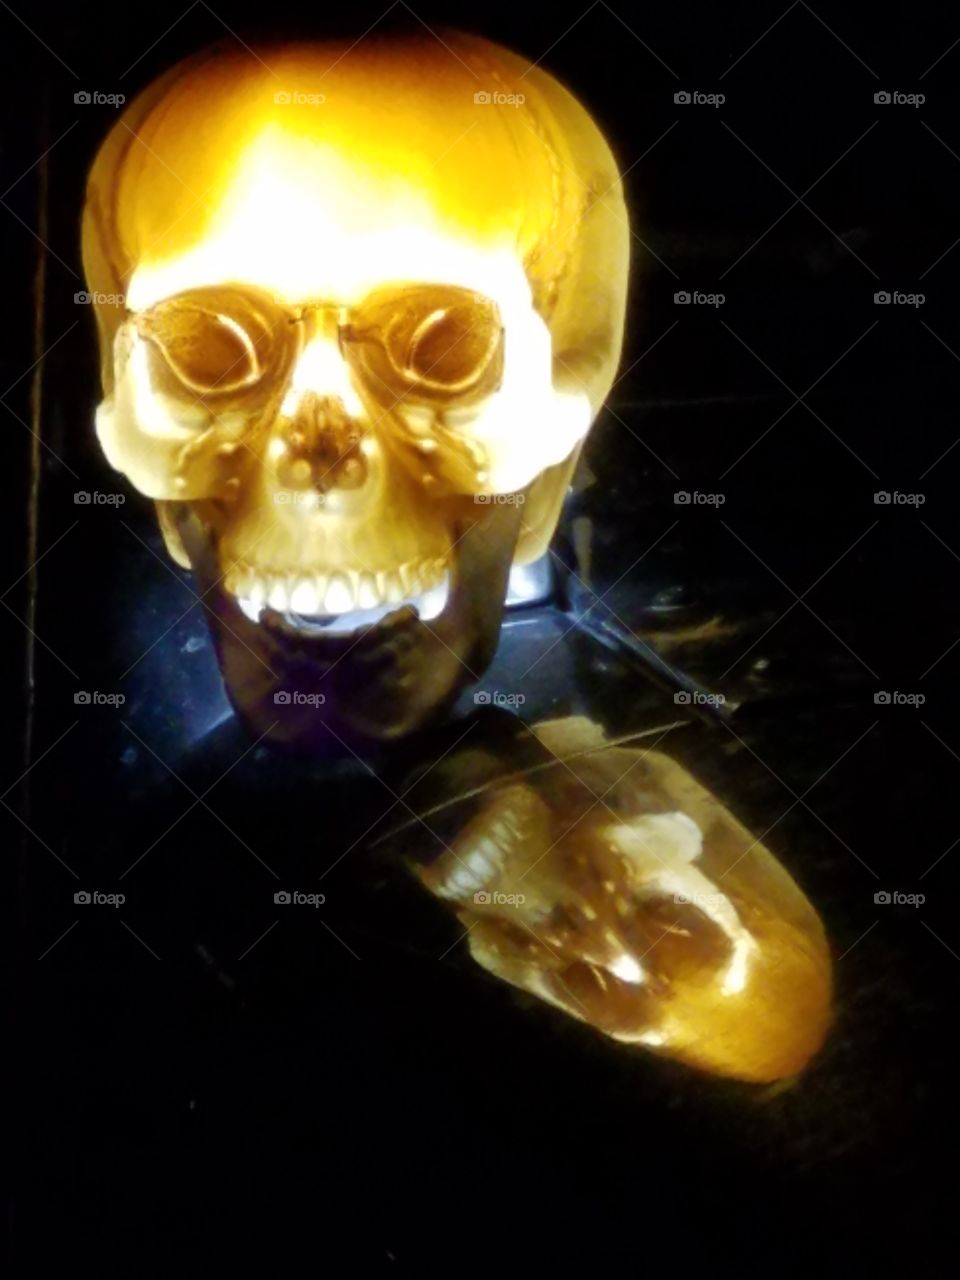 Skull and reflection